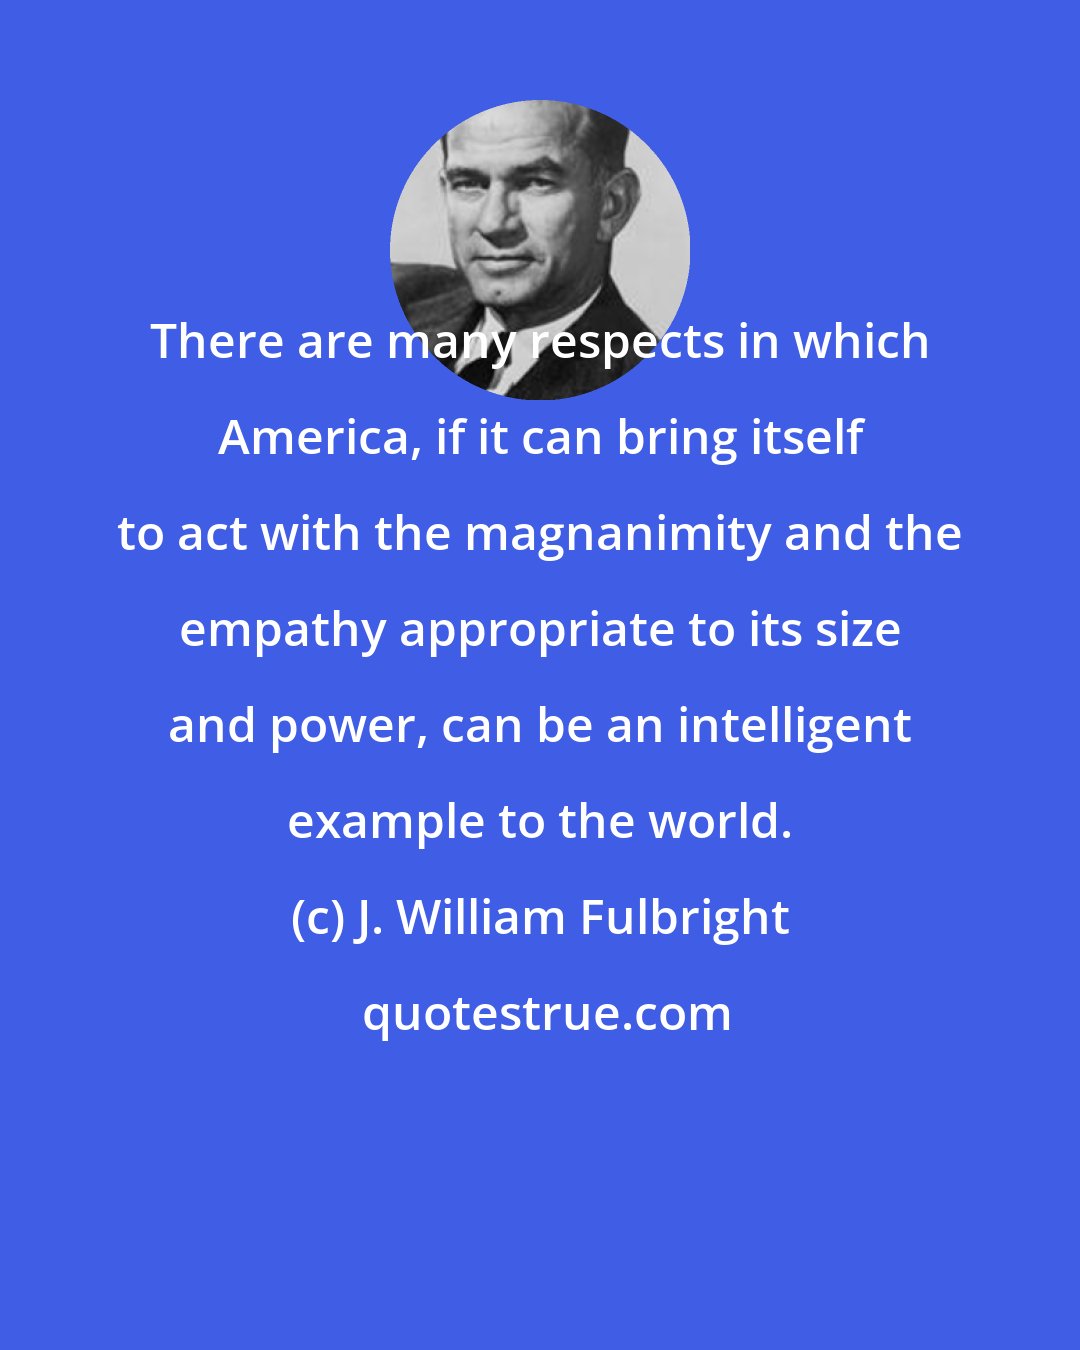 J. William Fulbright: There are many respects in which America, if it can bring itself to act with the magnanimity and the empathy appropriate to its size and power, can be an intelligent example to the world.